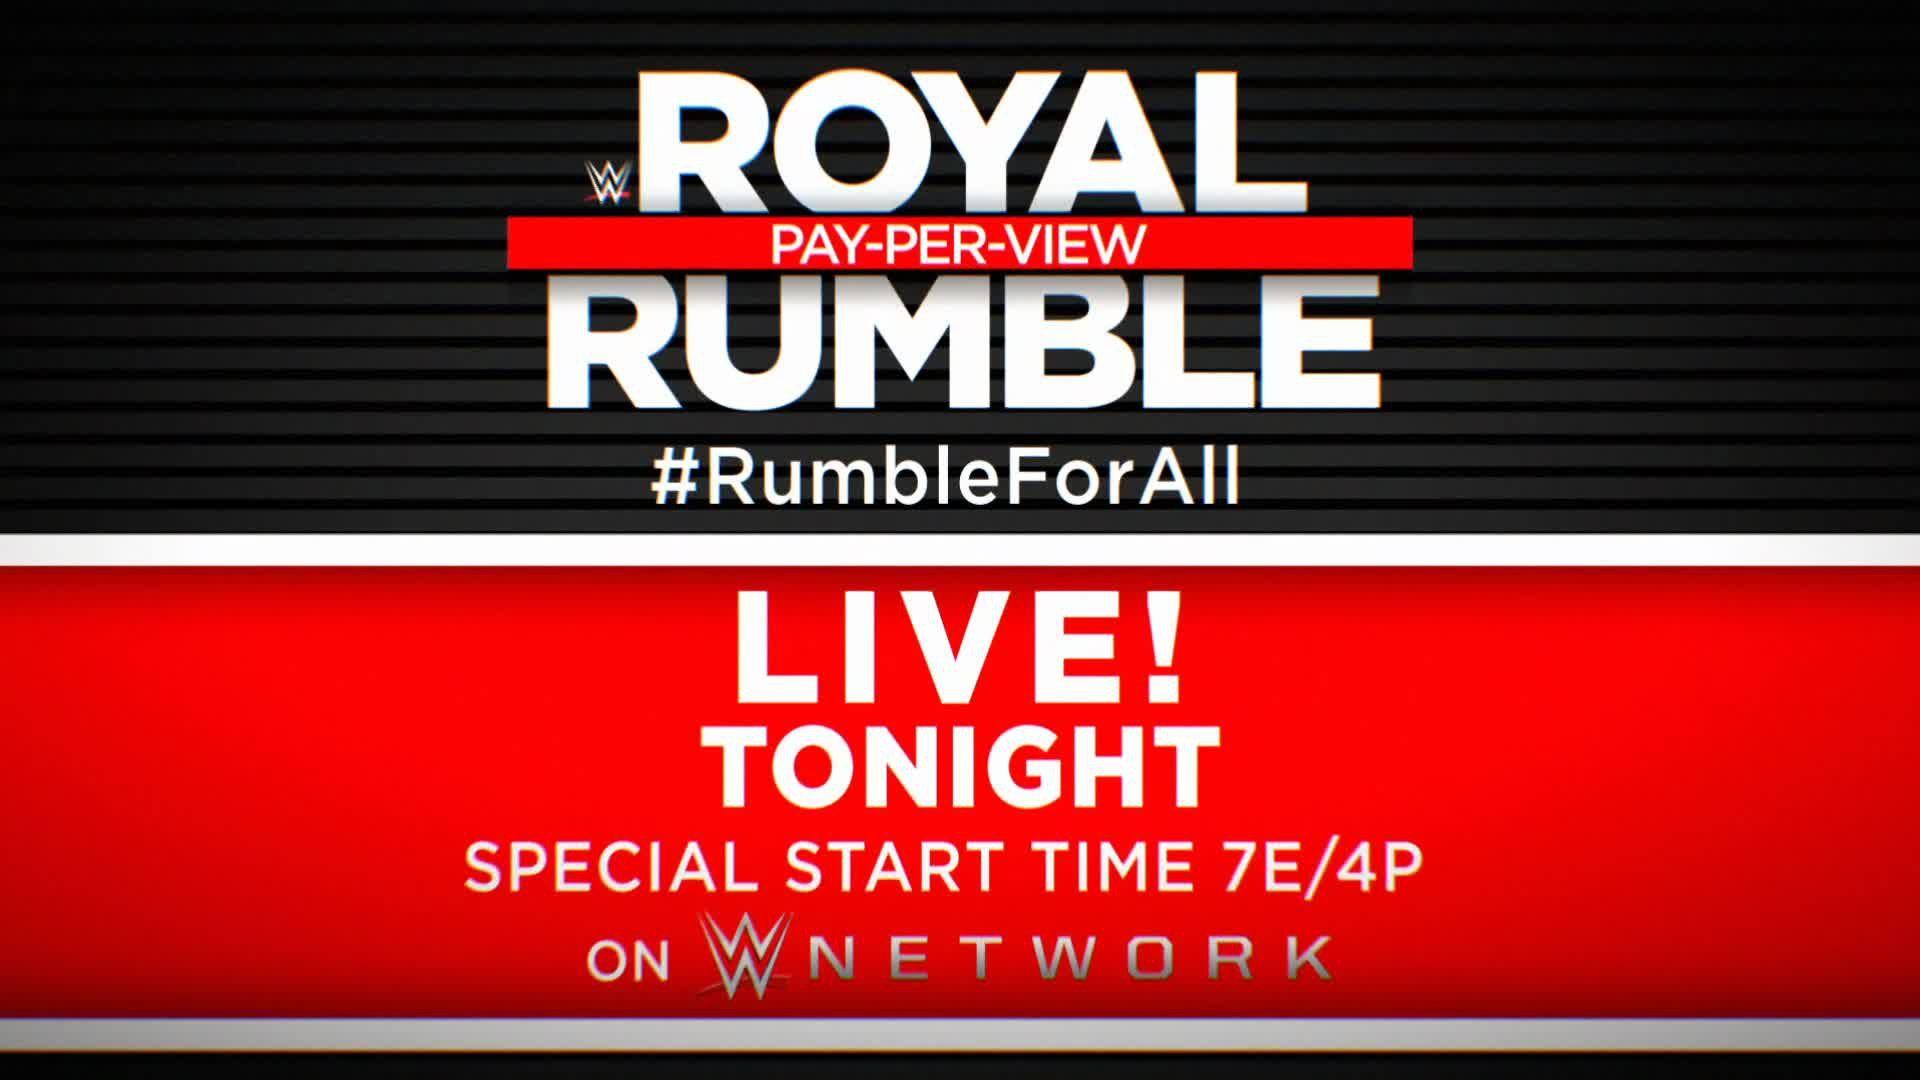 Don't Miss The Men's And First Ever Women's Royal Rumble Matches